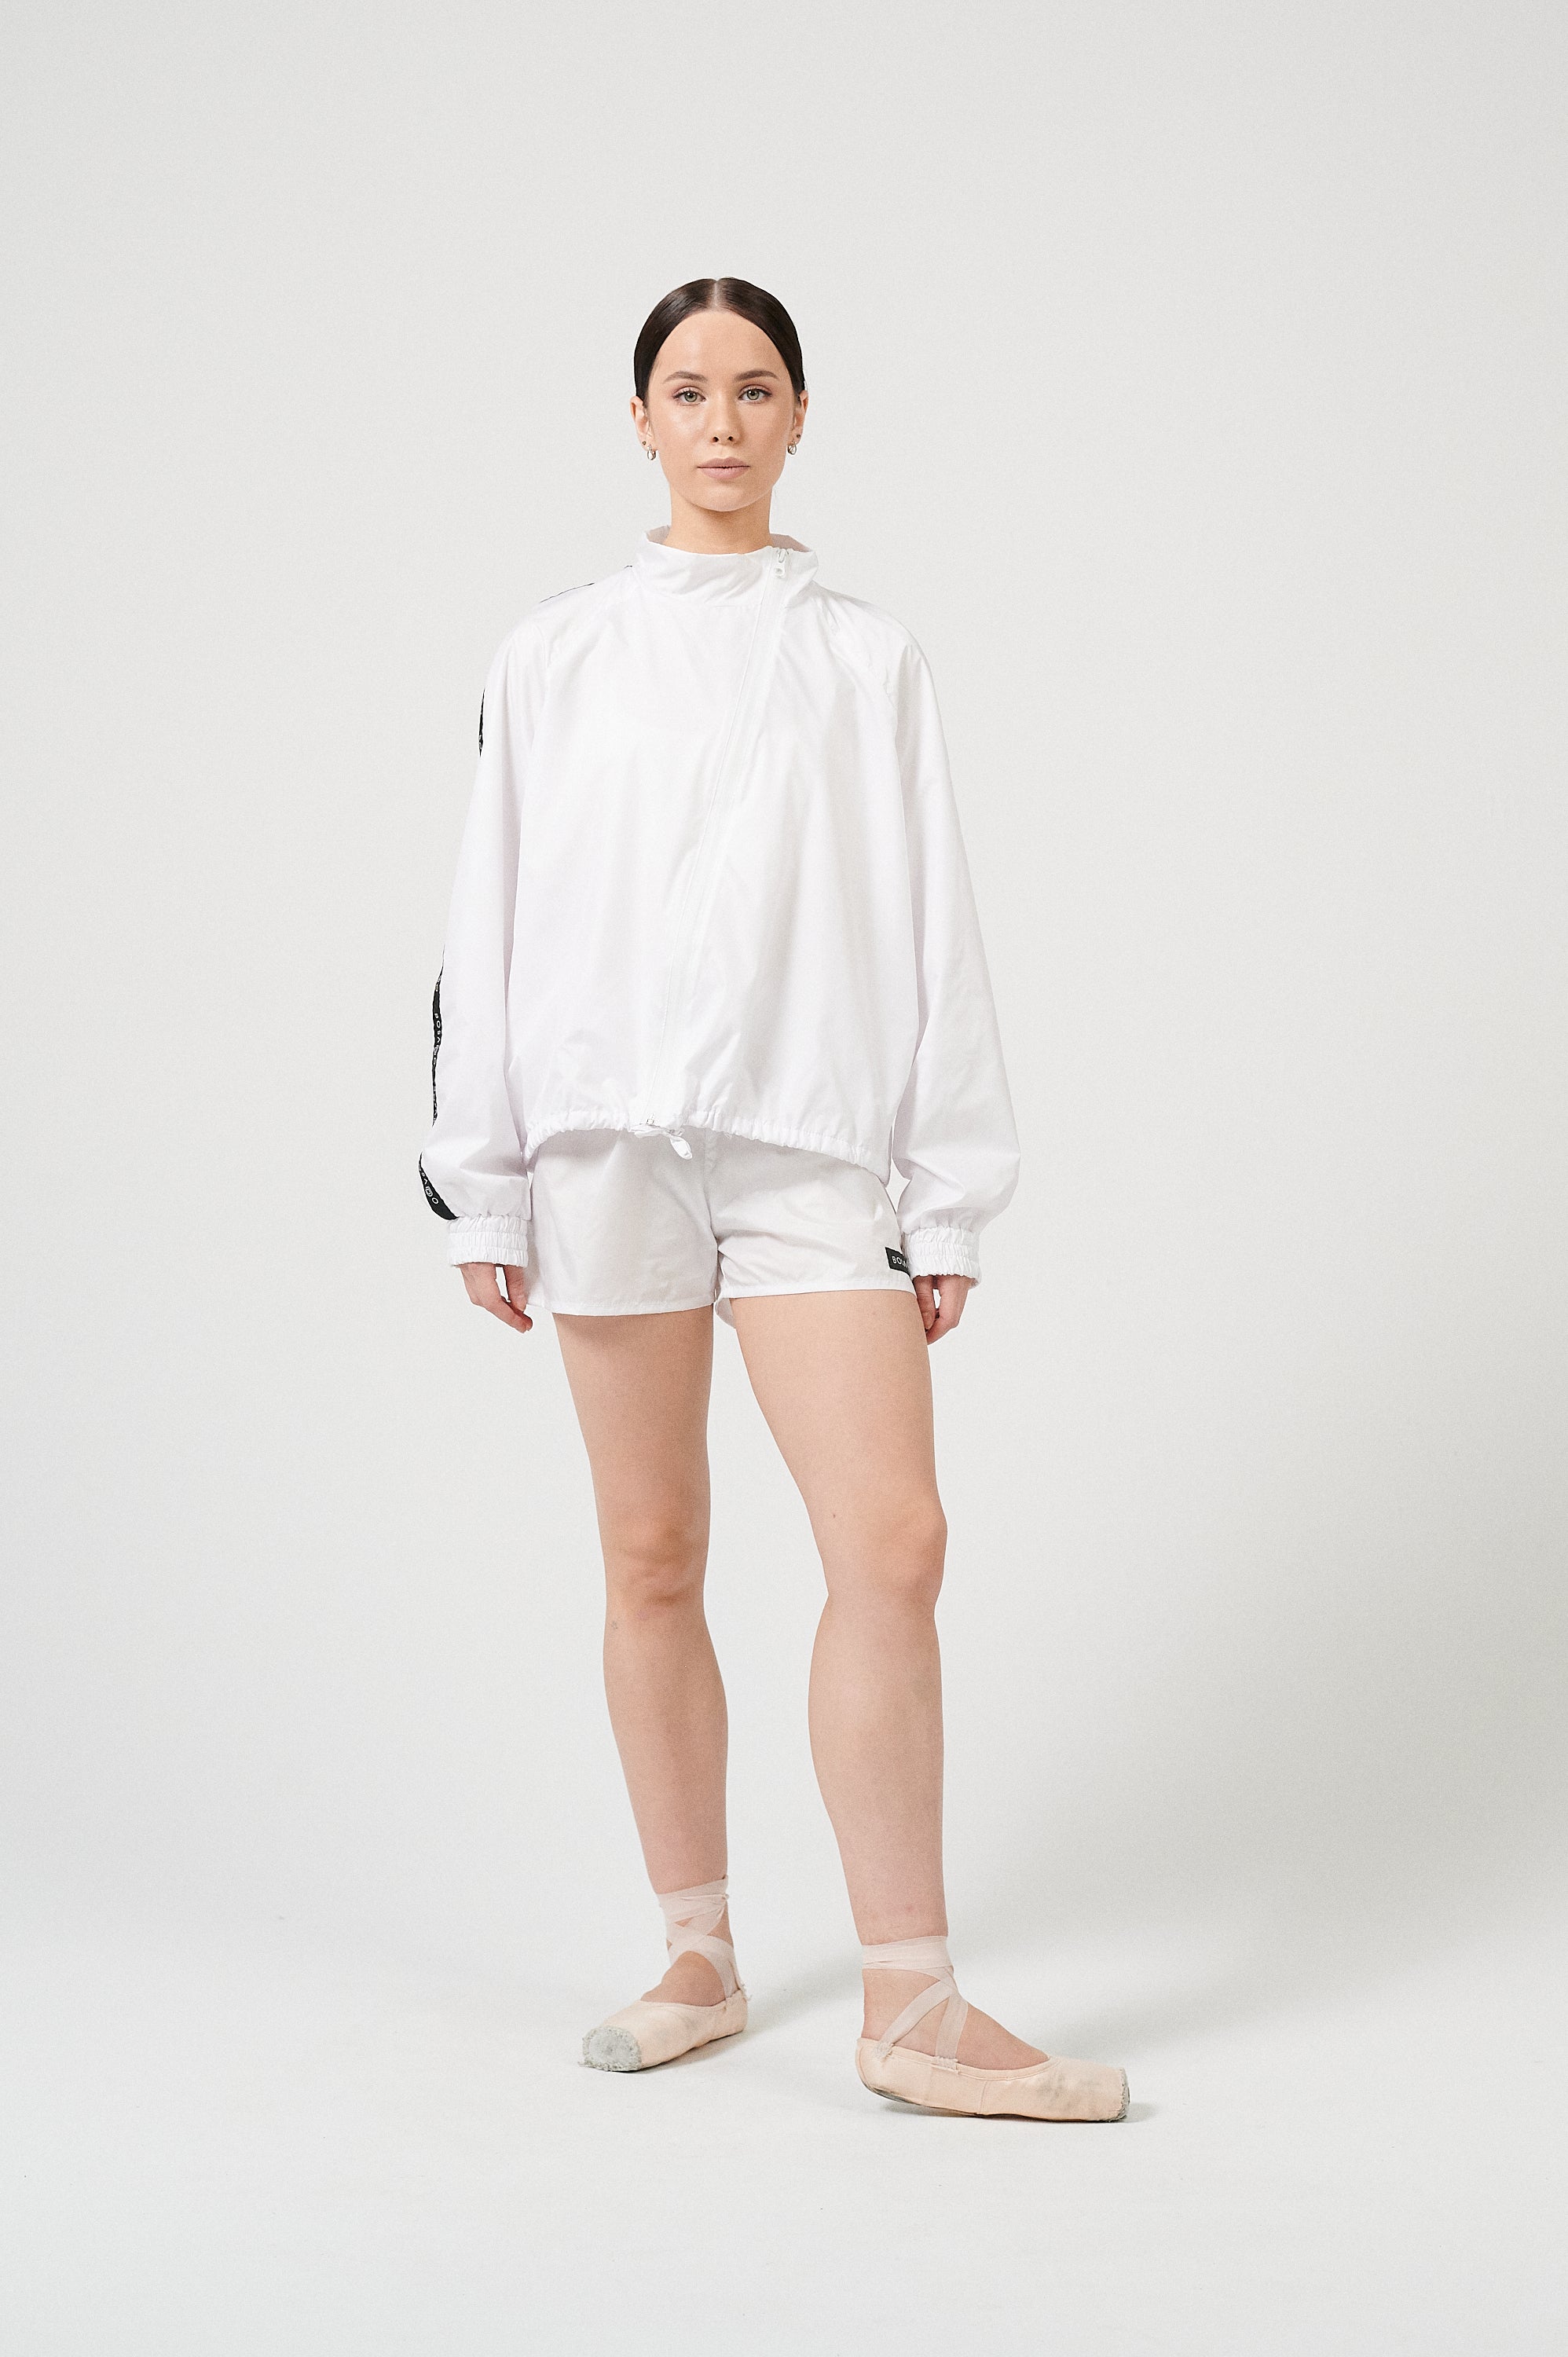 FUTURE GISELLE COLLECTION 24 | Cosmic white sports suit with pants + shorts